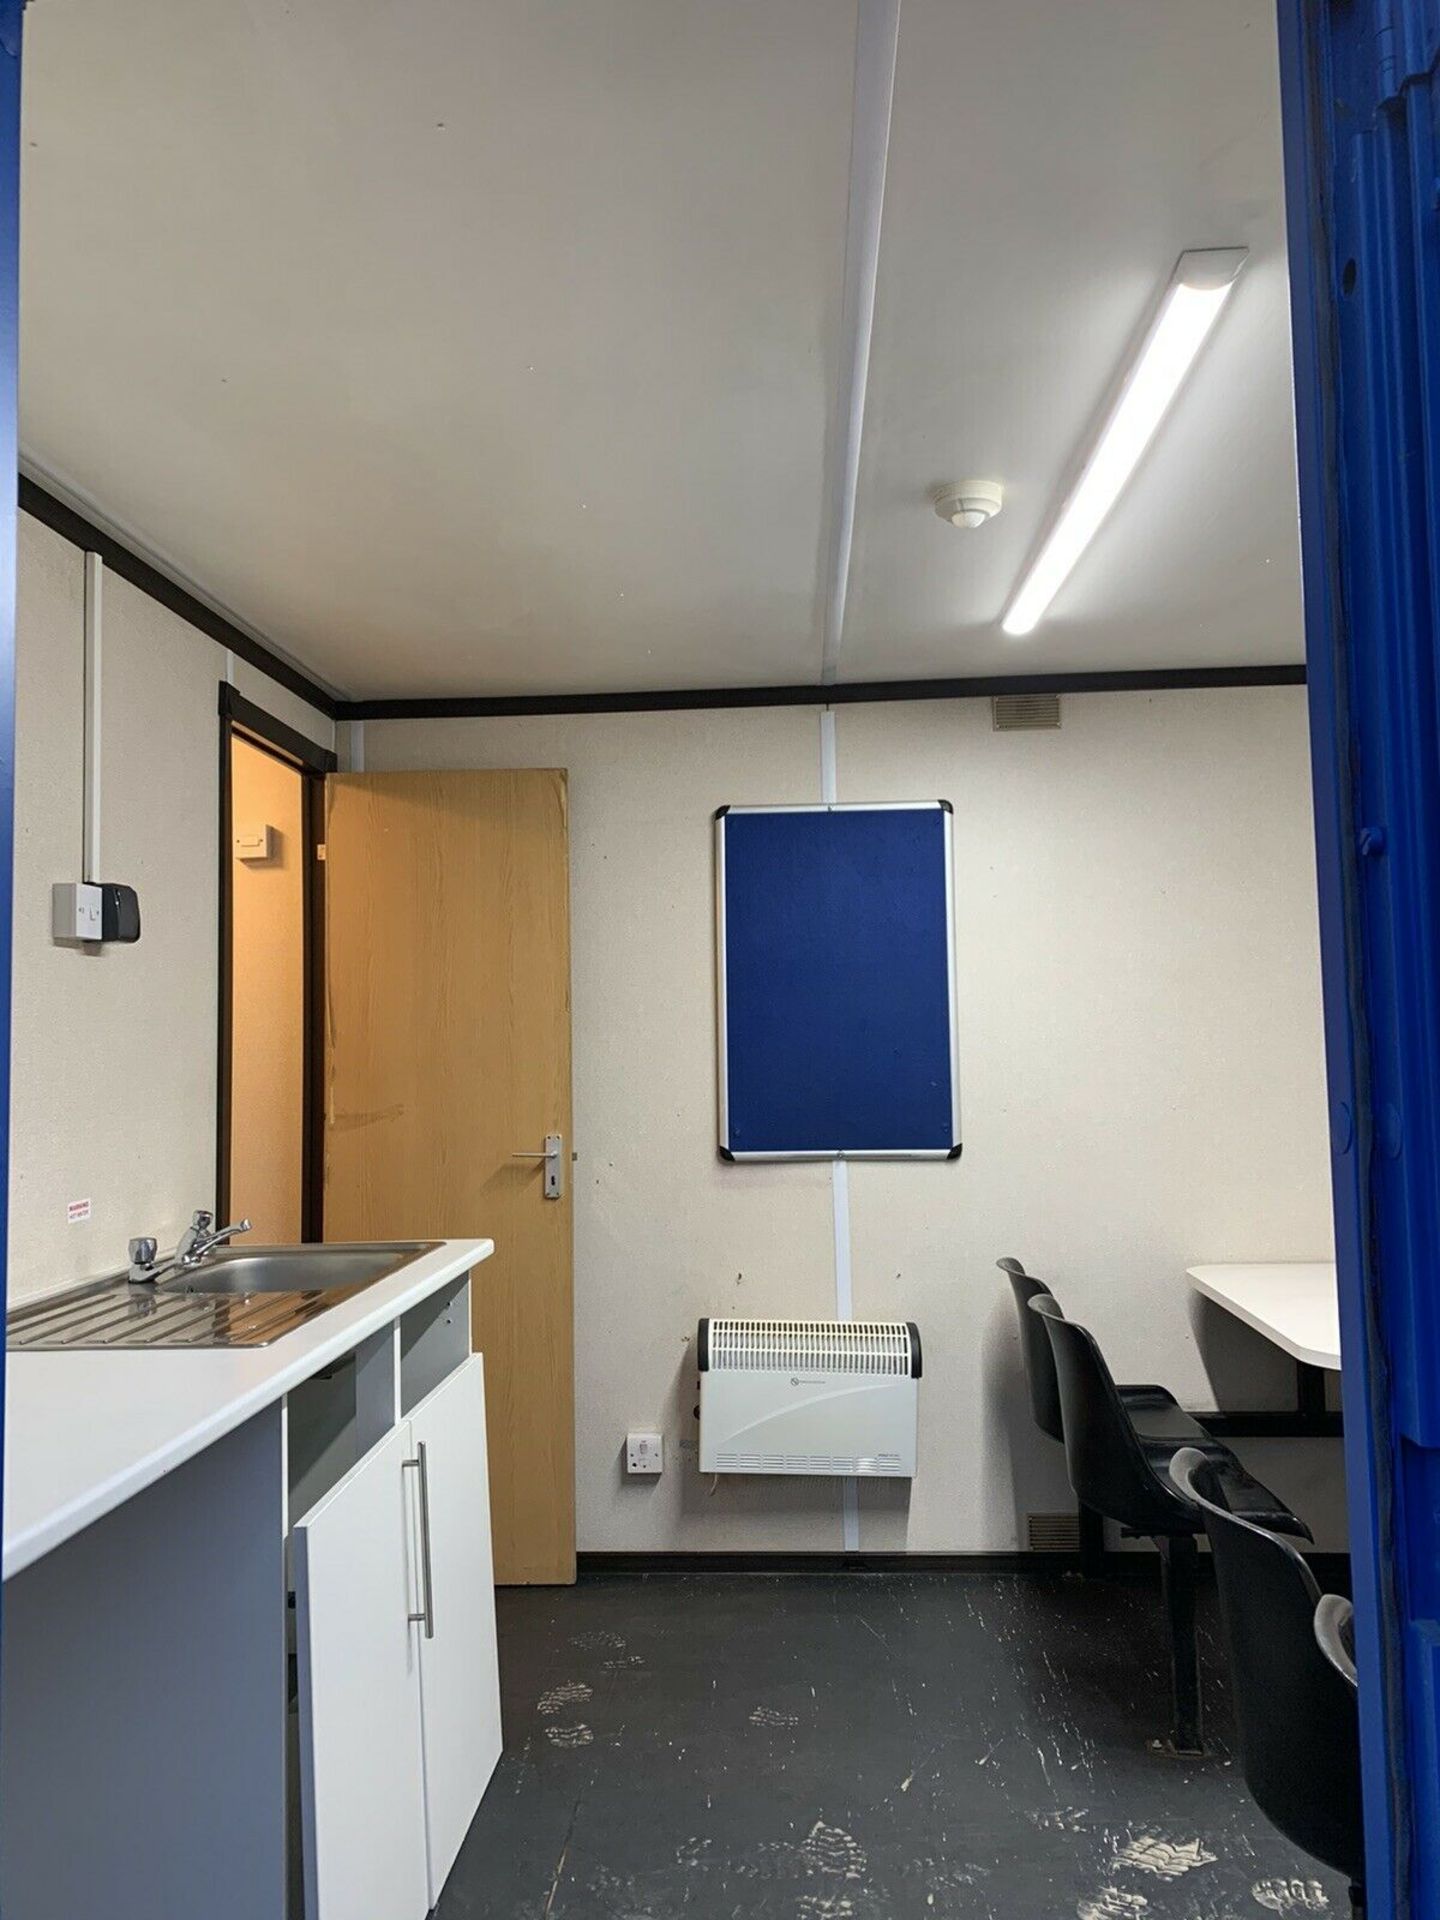 Welfare Unit Site Office Portable Cabin Canteen Toilet - Image 3 of 10